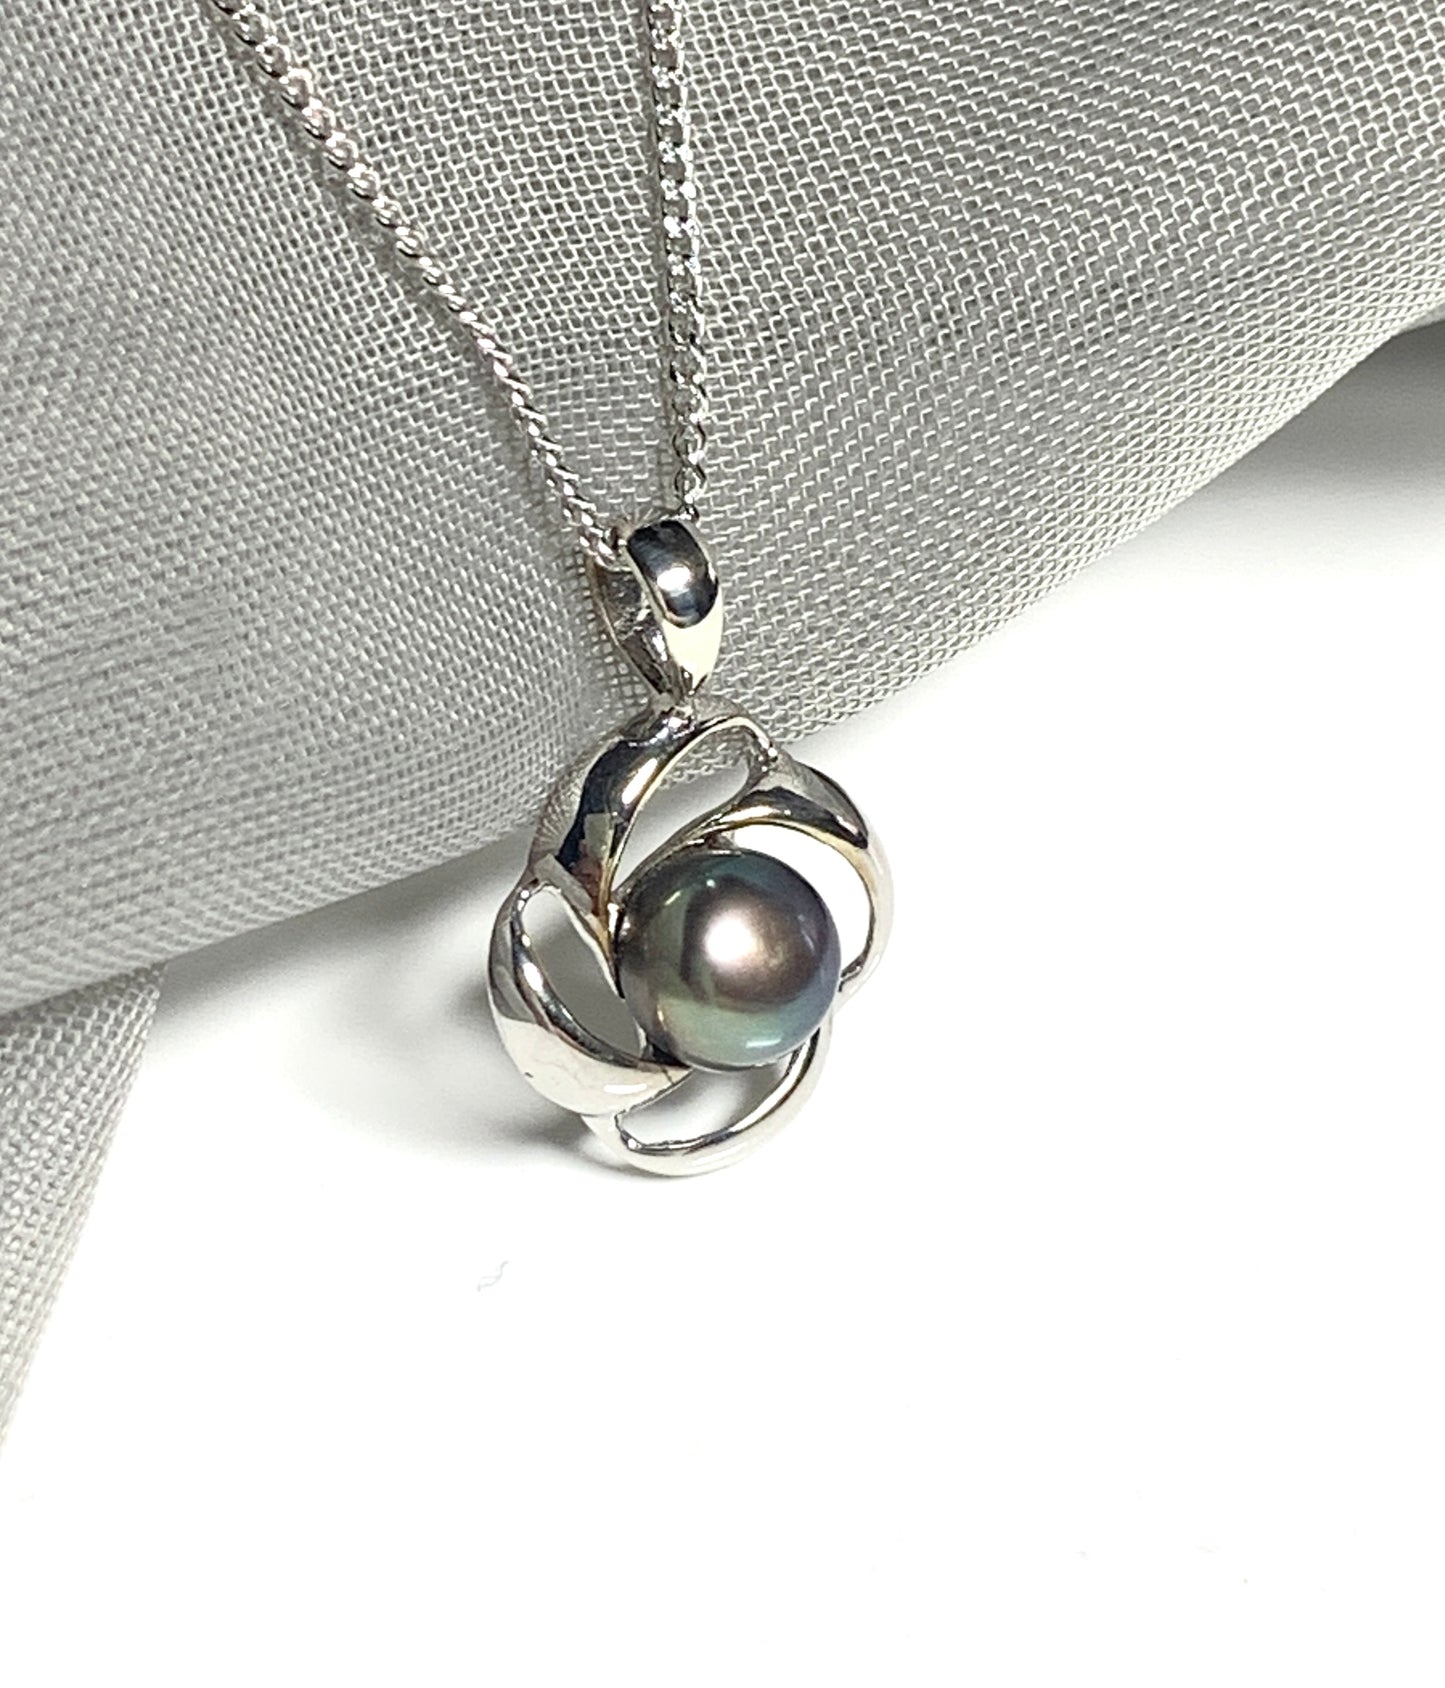 Grey pearl necklace white gold pendant